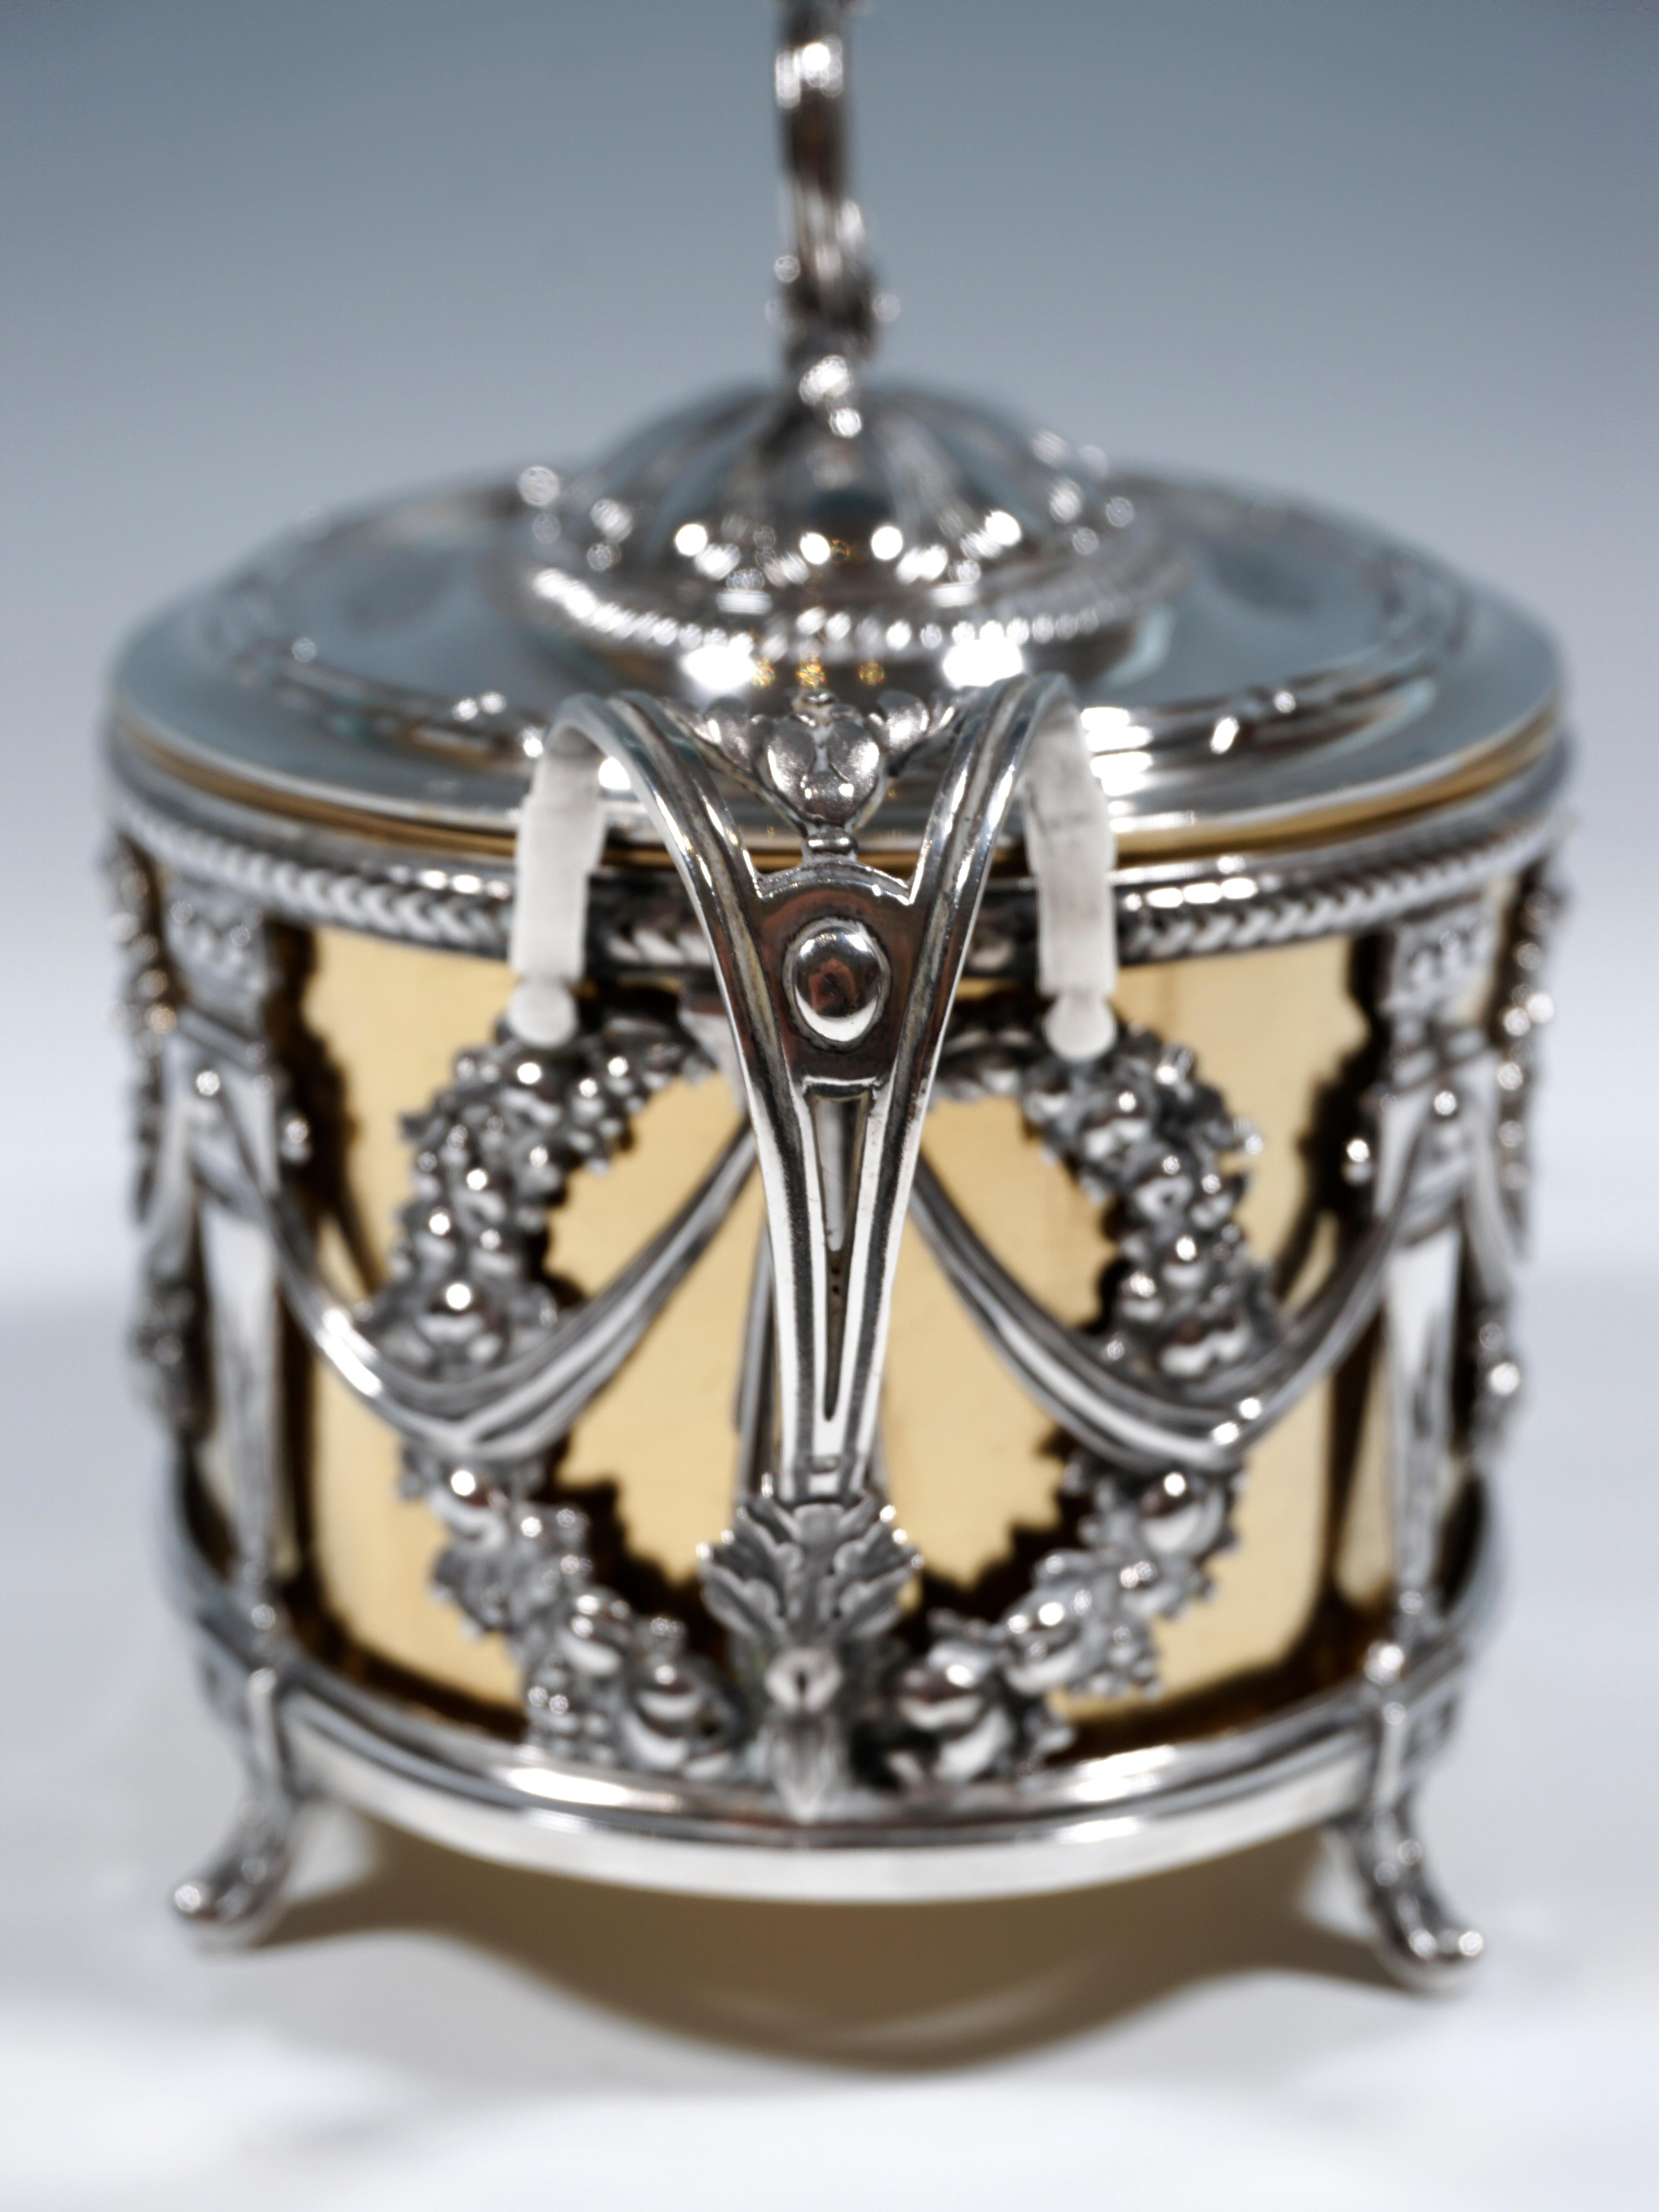 Hand-Crafted Magnificent Silver Sugar Bowl with Gilding, Adolphe Boulenger Paris, around 1890